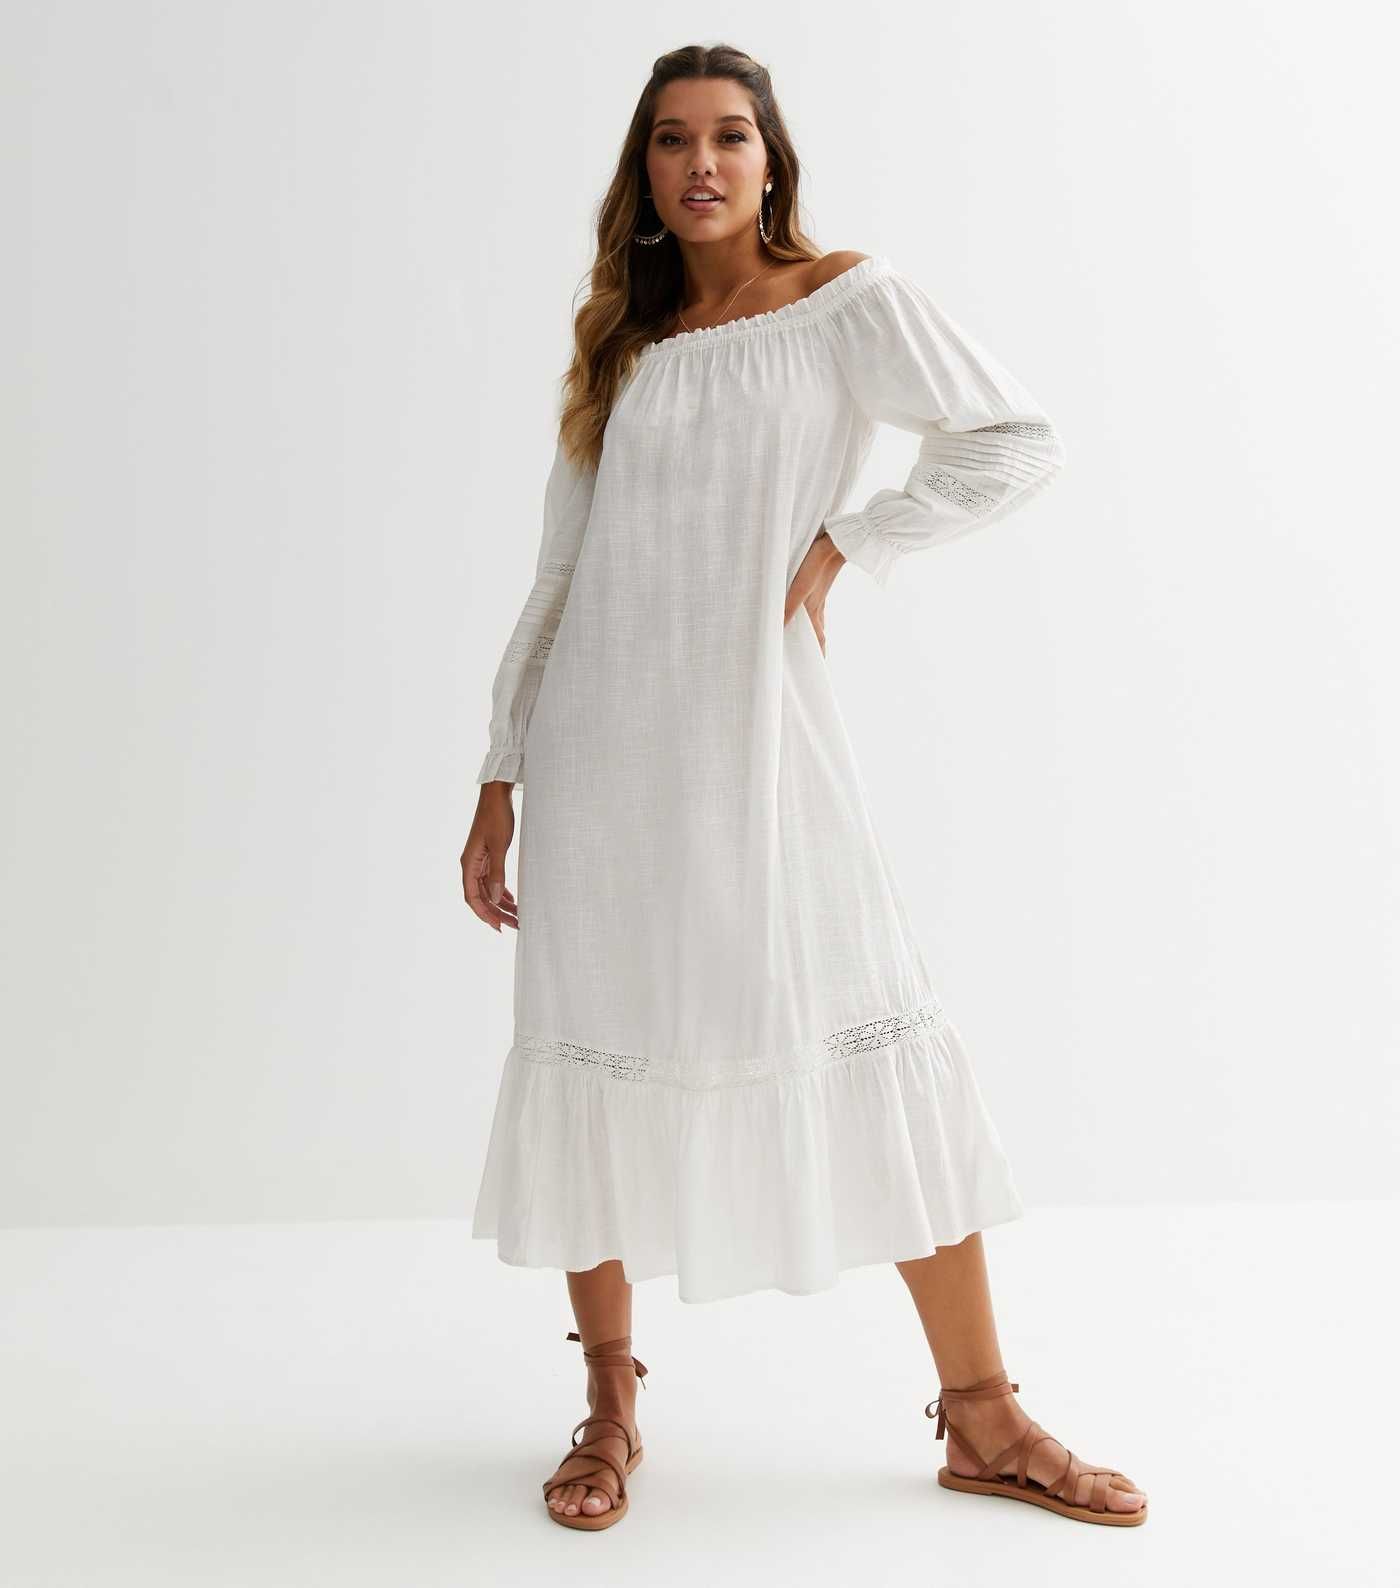 White Linen Look 3/4 Sleeve Bardot Midi Dress
						
						Add to Saved Items
						Remove from S... | New Look (UK)